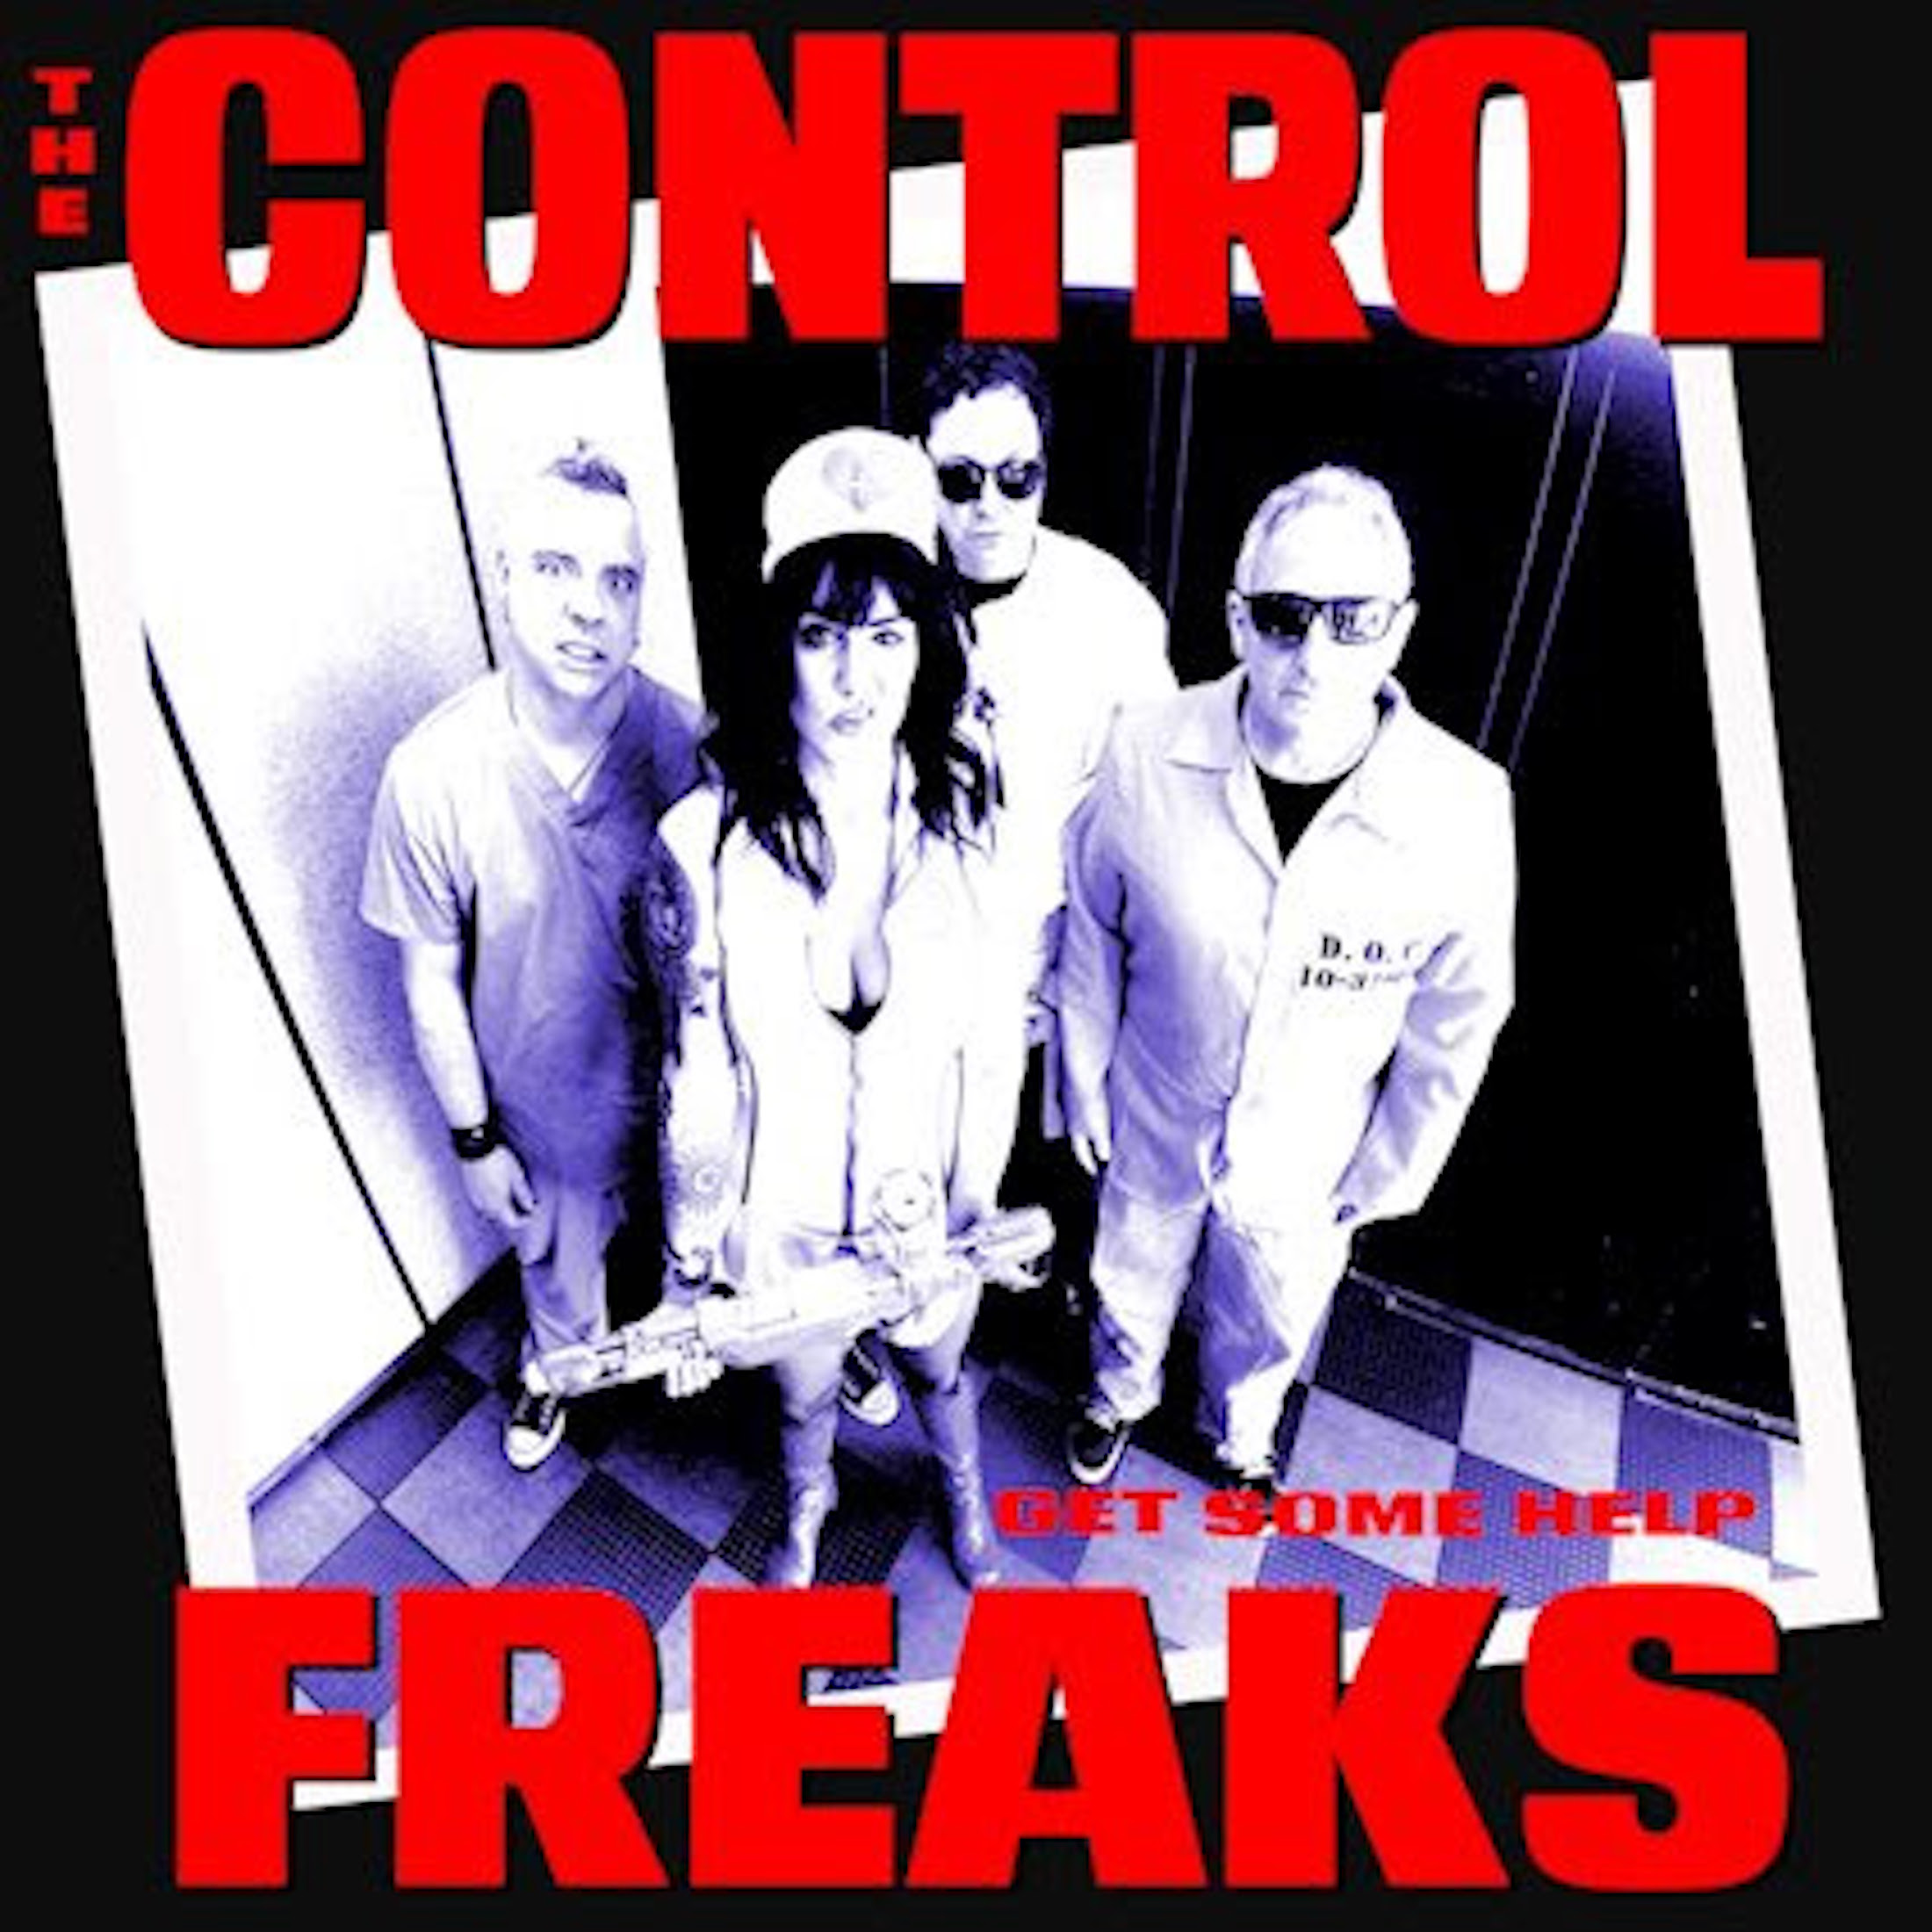 The Control Freaks Release "FBI" from their new album "Get Some Help"